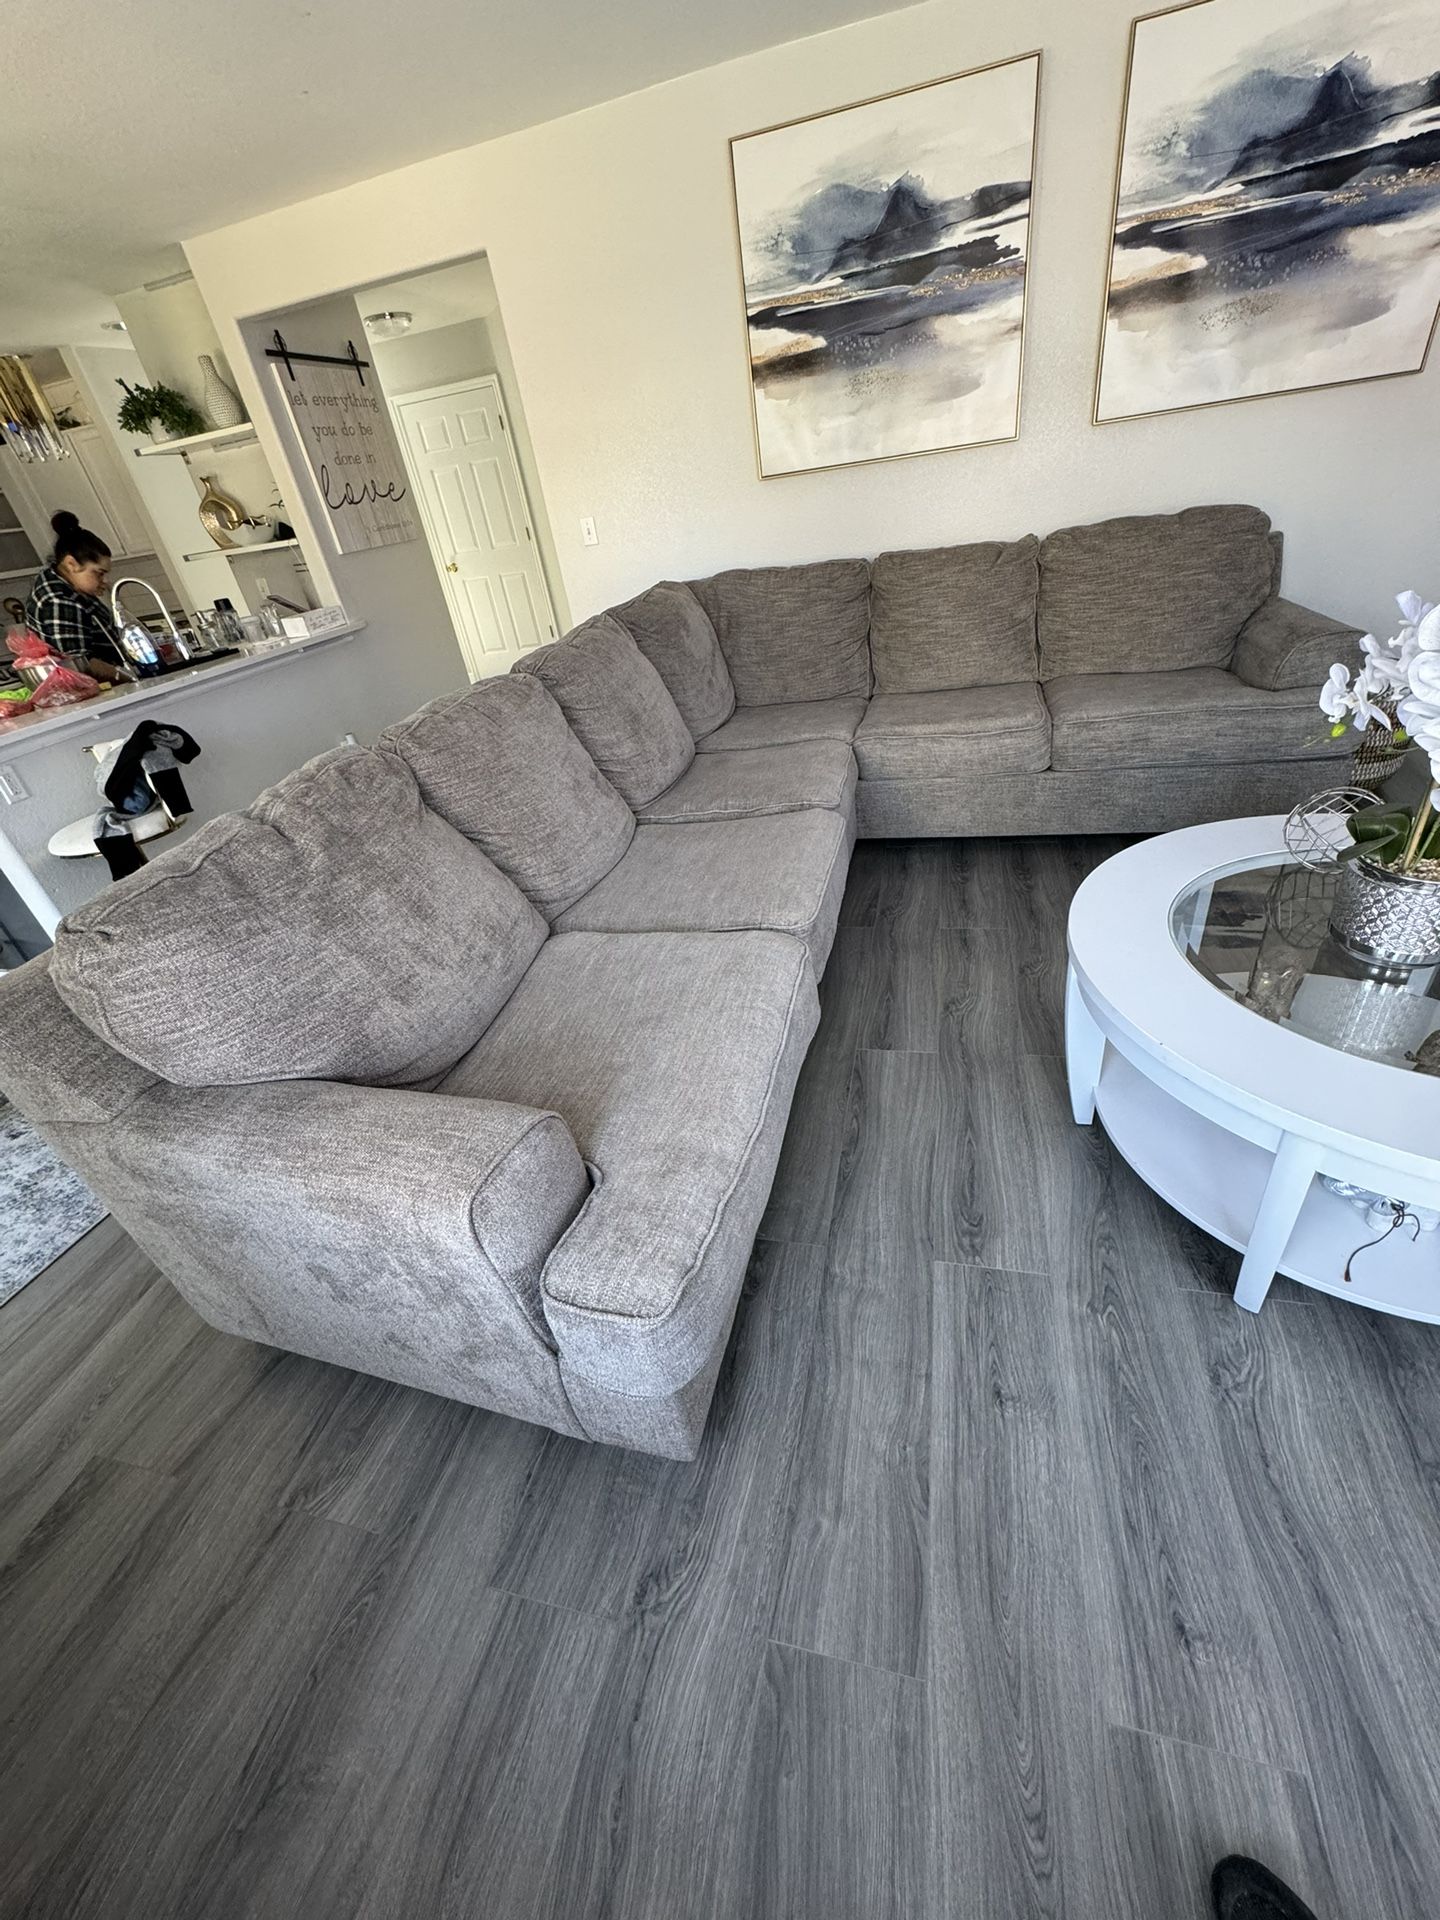 Sectional Gray Sofas & Couches